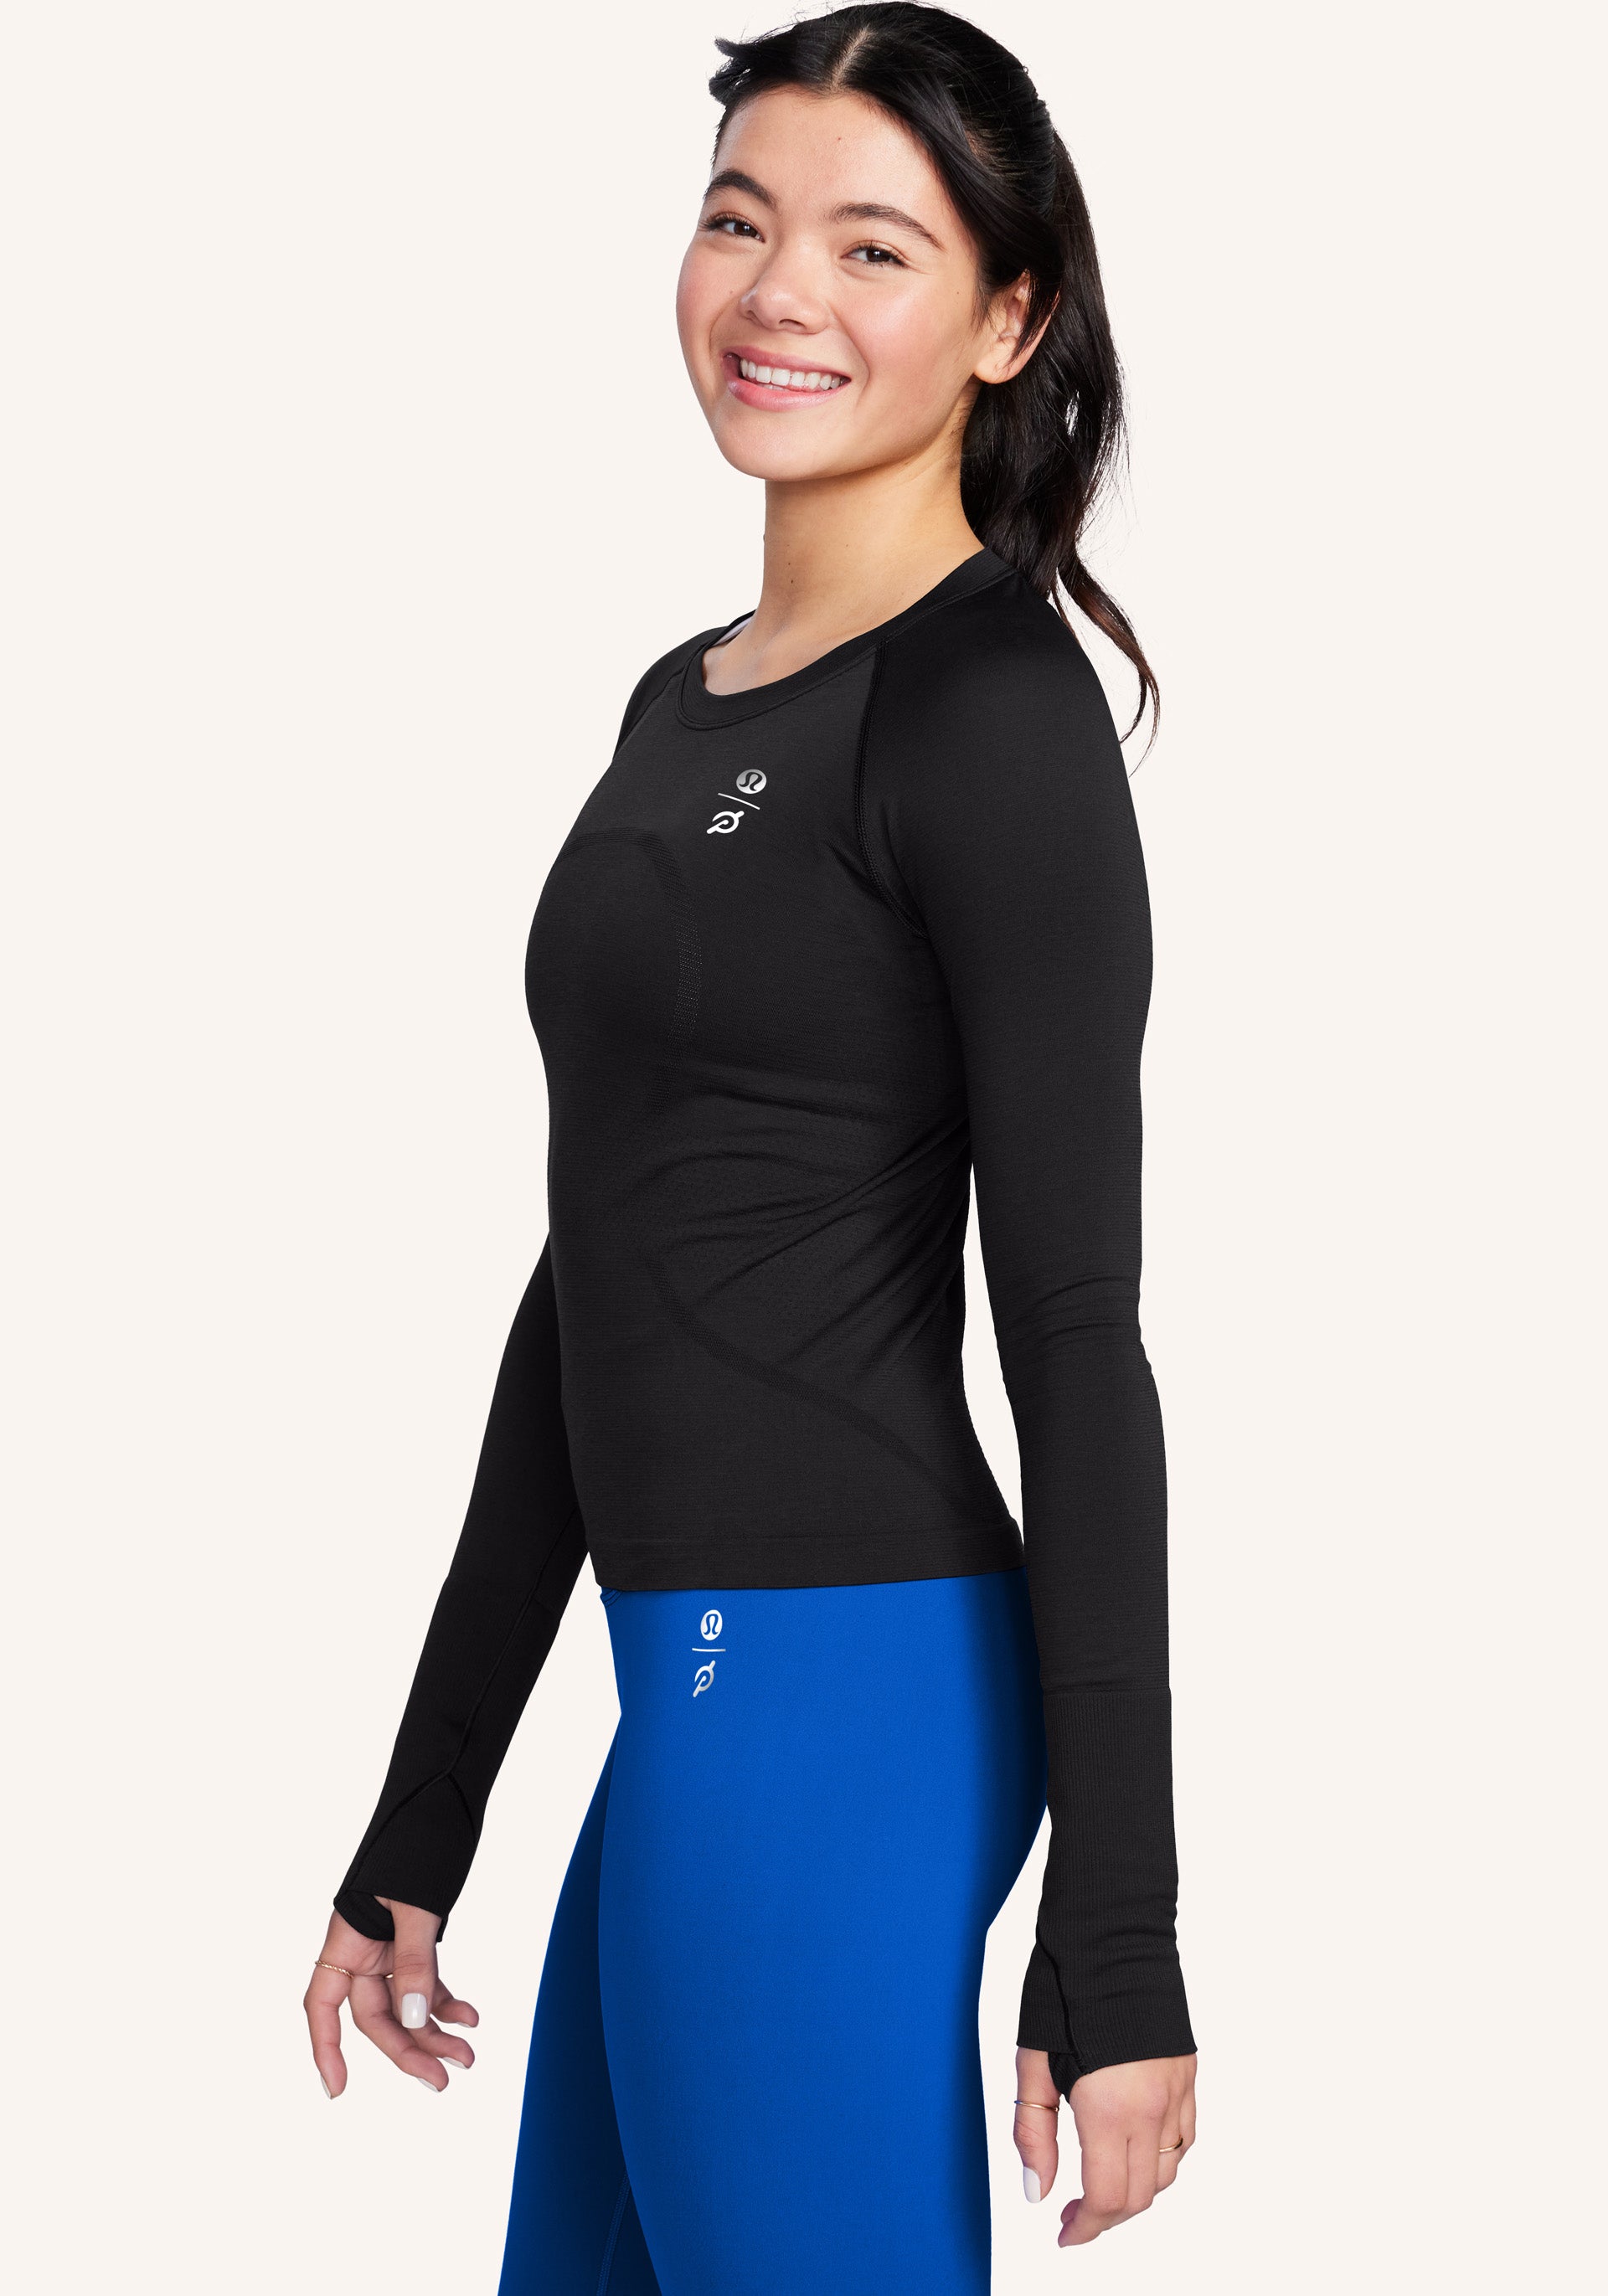 In 30 Seconds or Less: Lululemon Swiftly Tech Long Sleeve 2.0